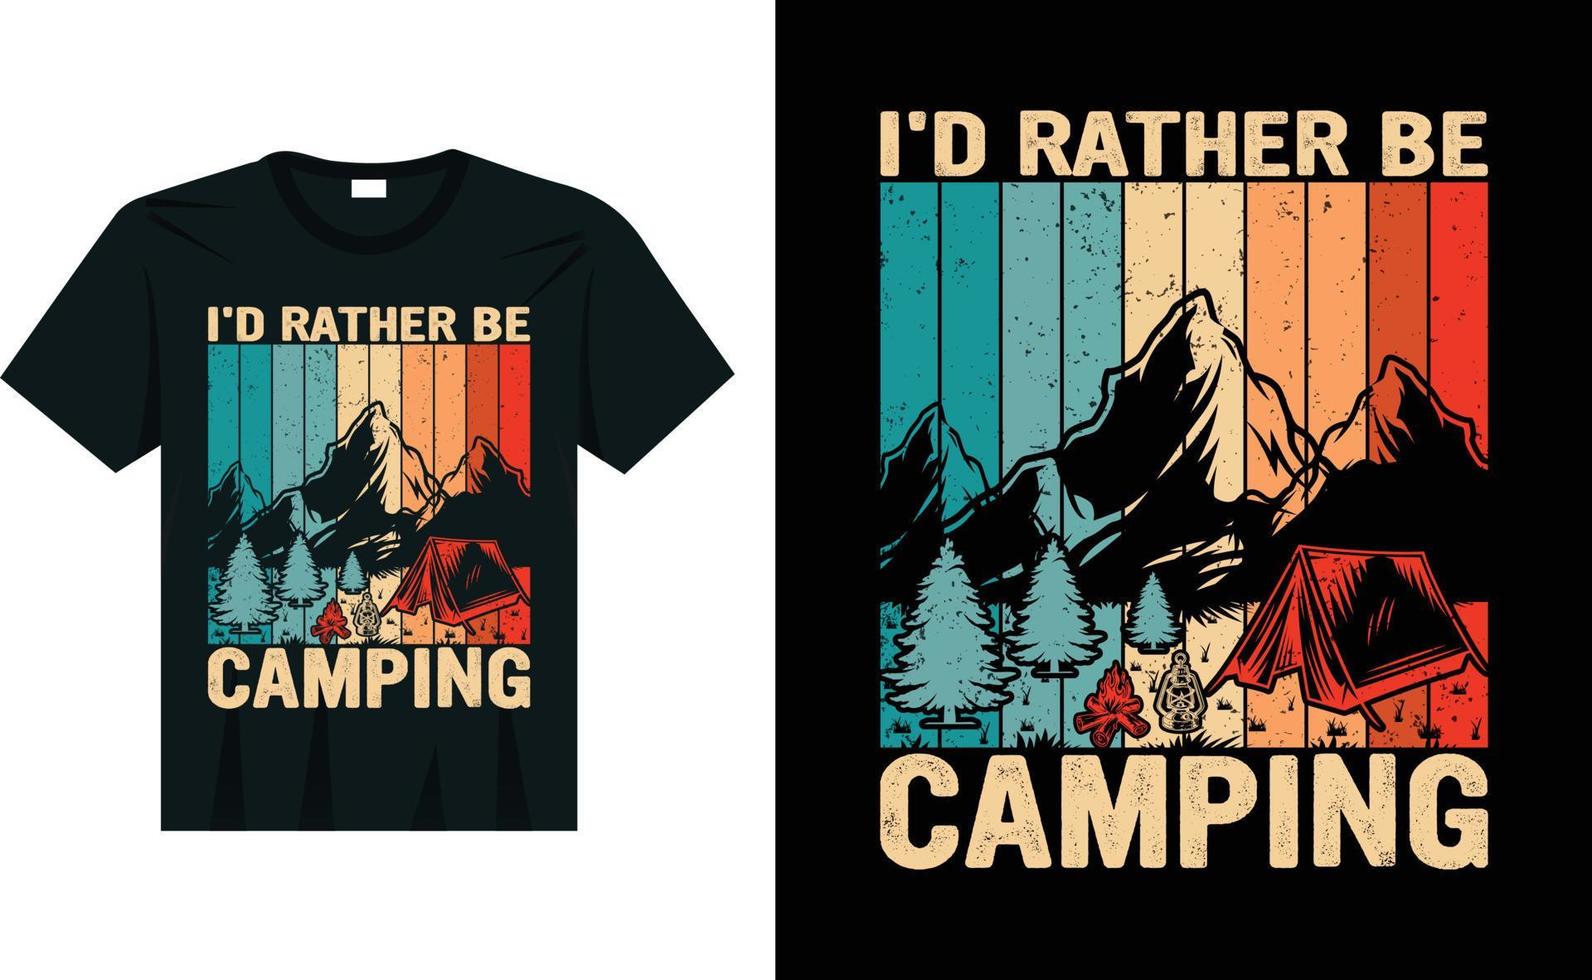 I'd rather be camping vintage camping t shirts for Campers vector